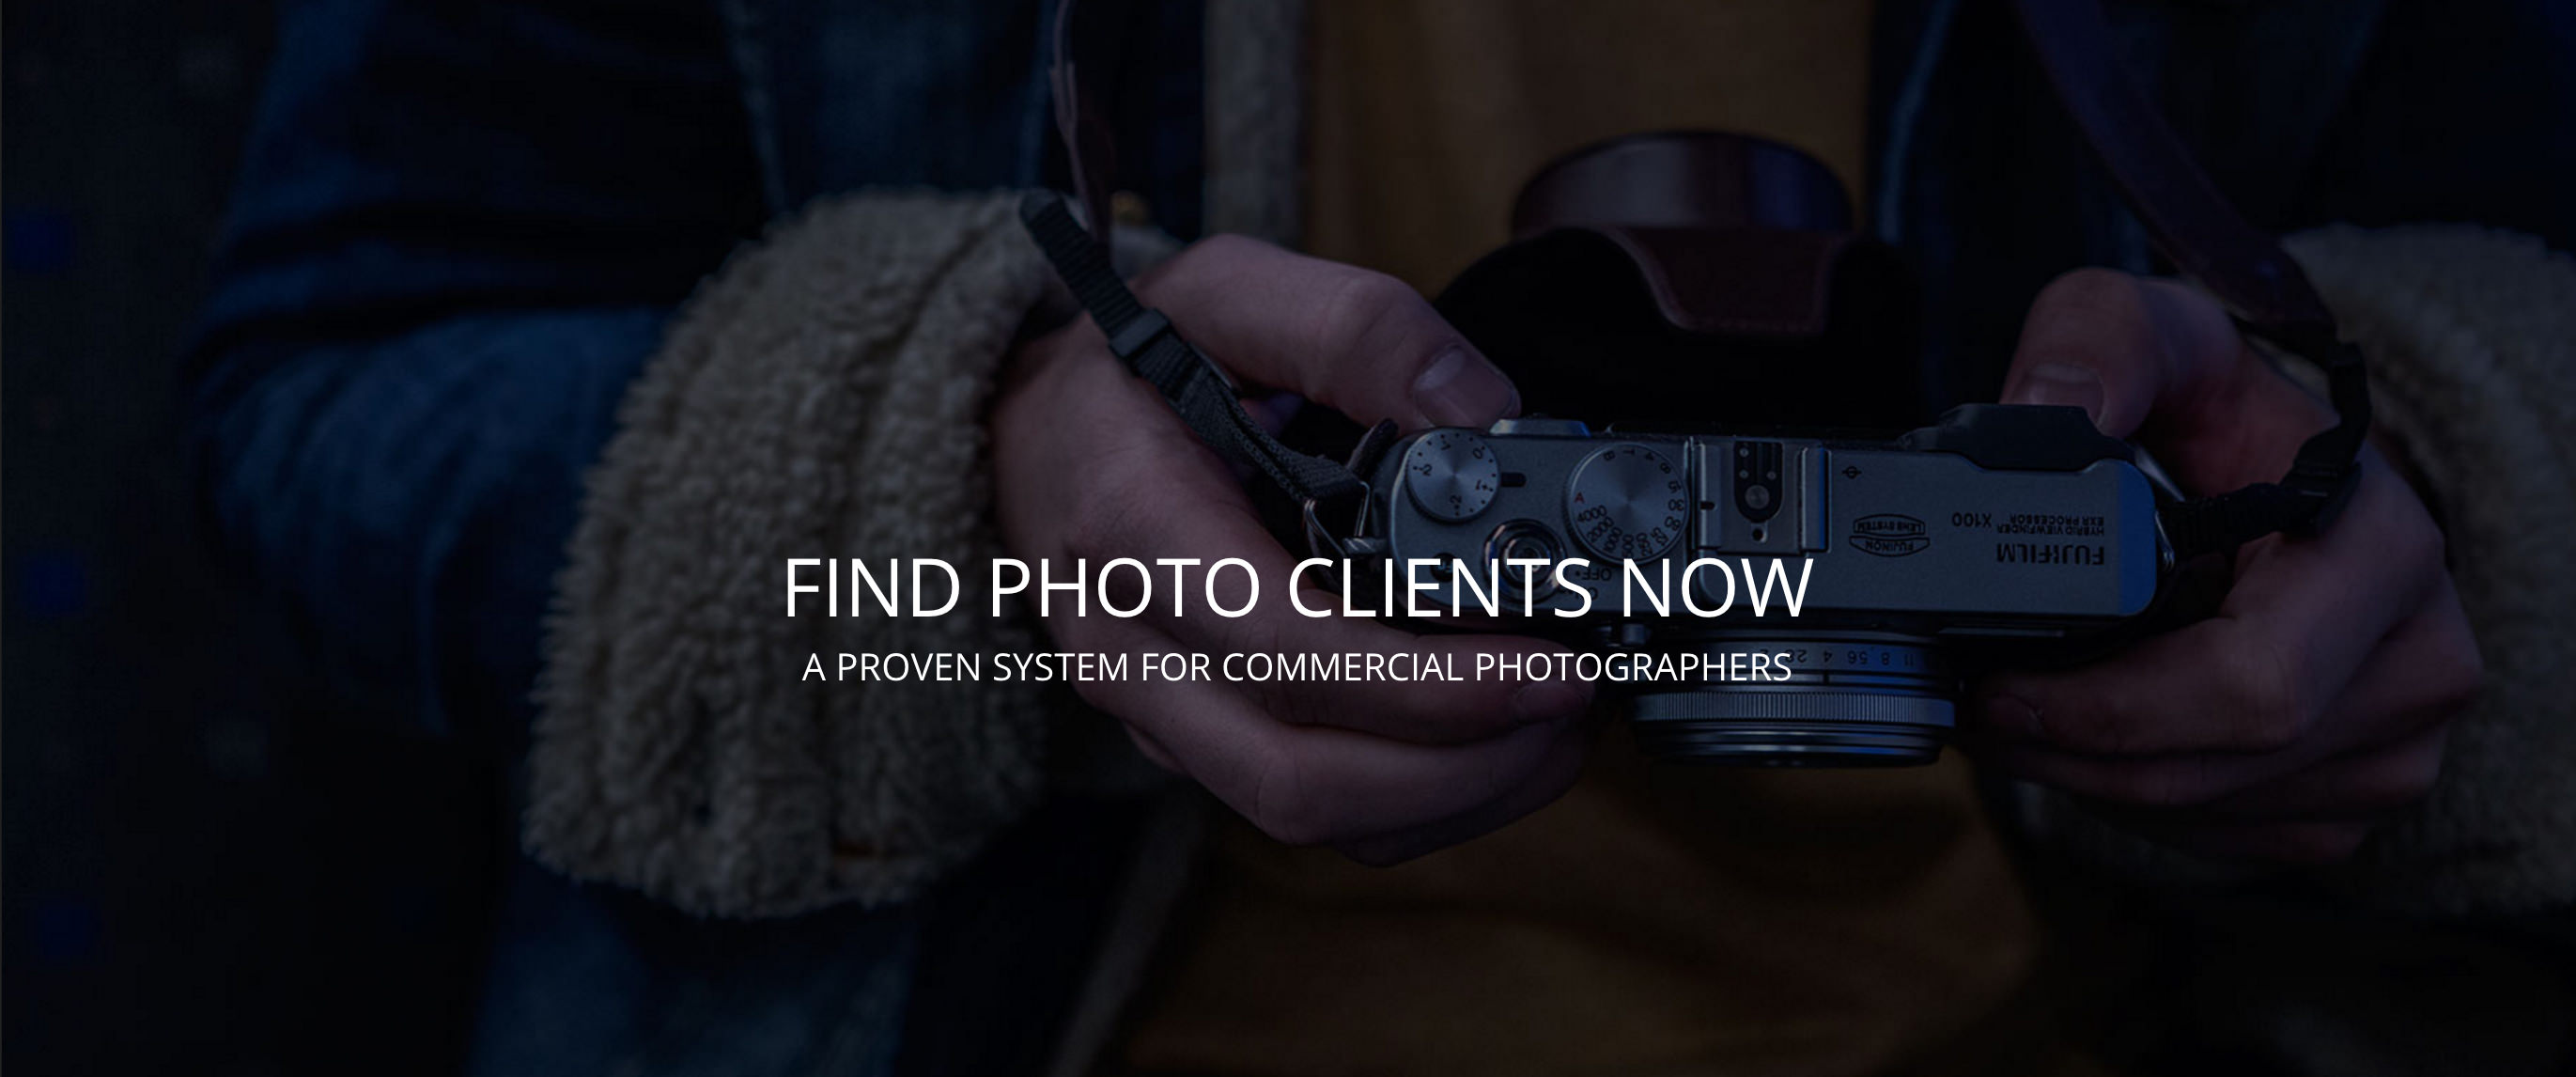 Don Giannatti Offers Free Training On Getting Photo Clients